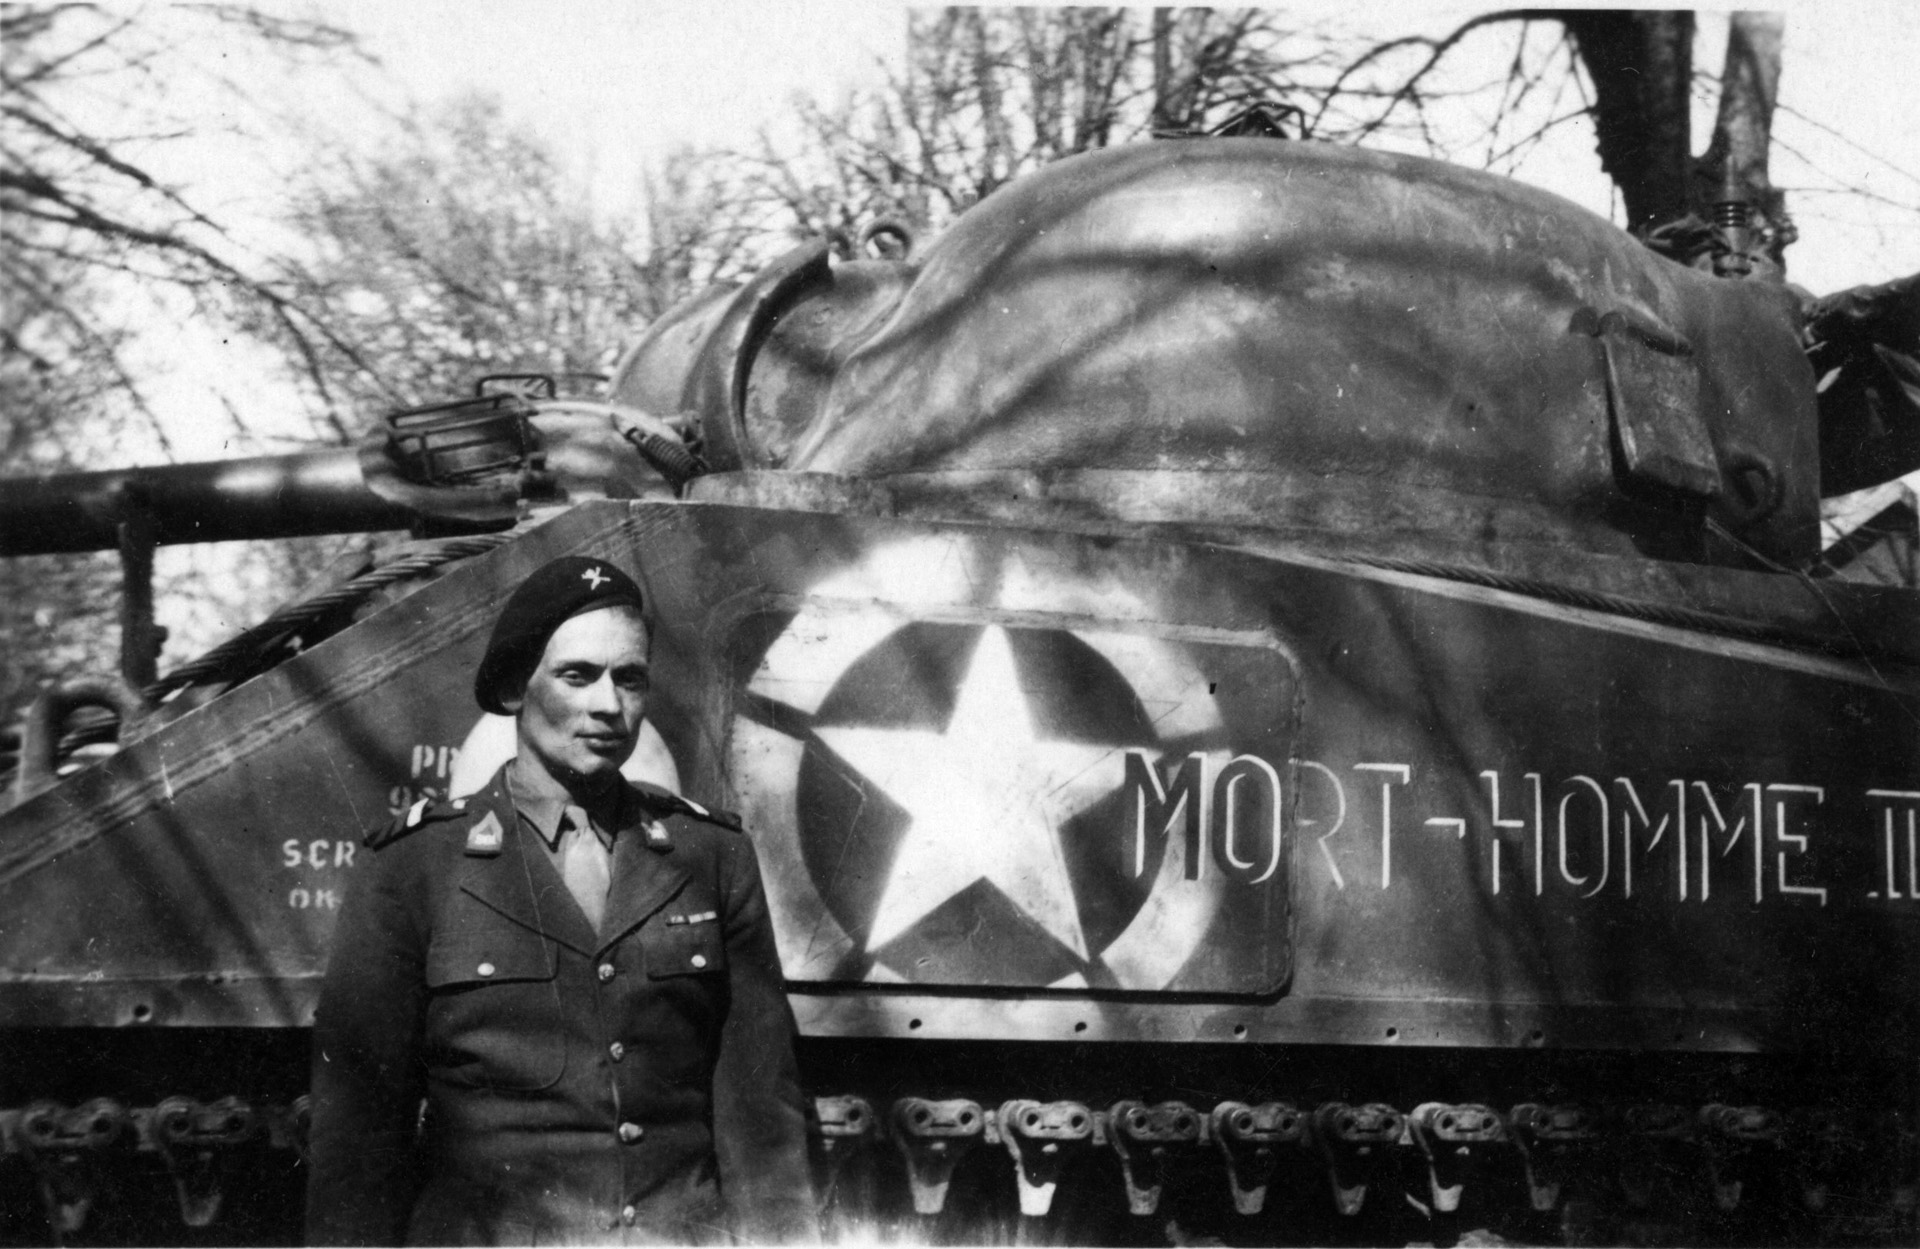 René, his cheek still recovering from burns received during a battle at Badonviller in November 1944, poses beside his tank shortly after the war.